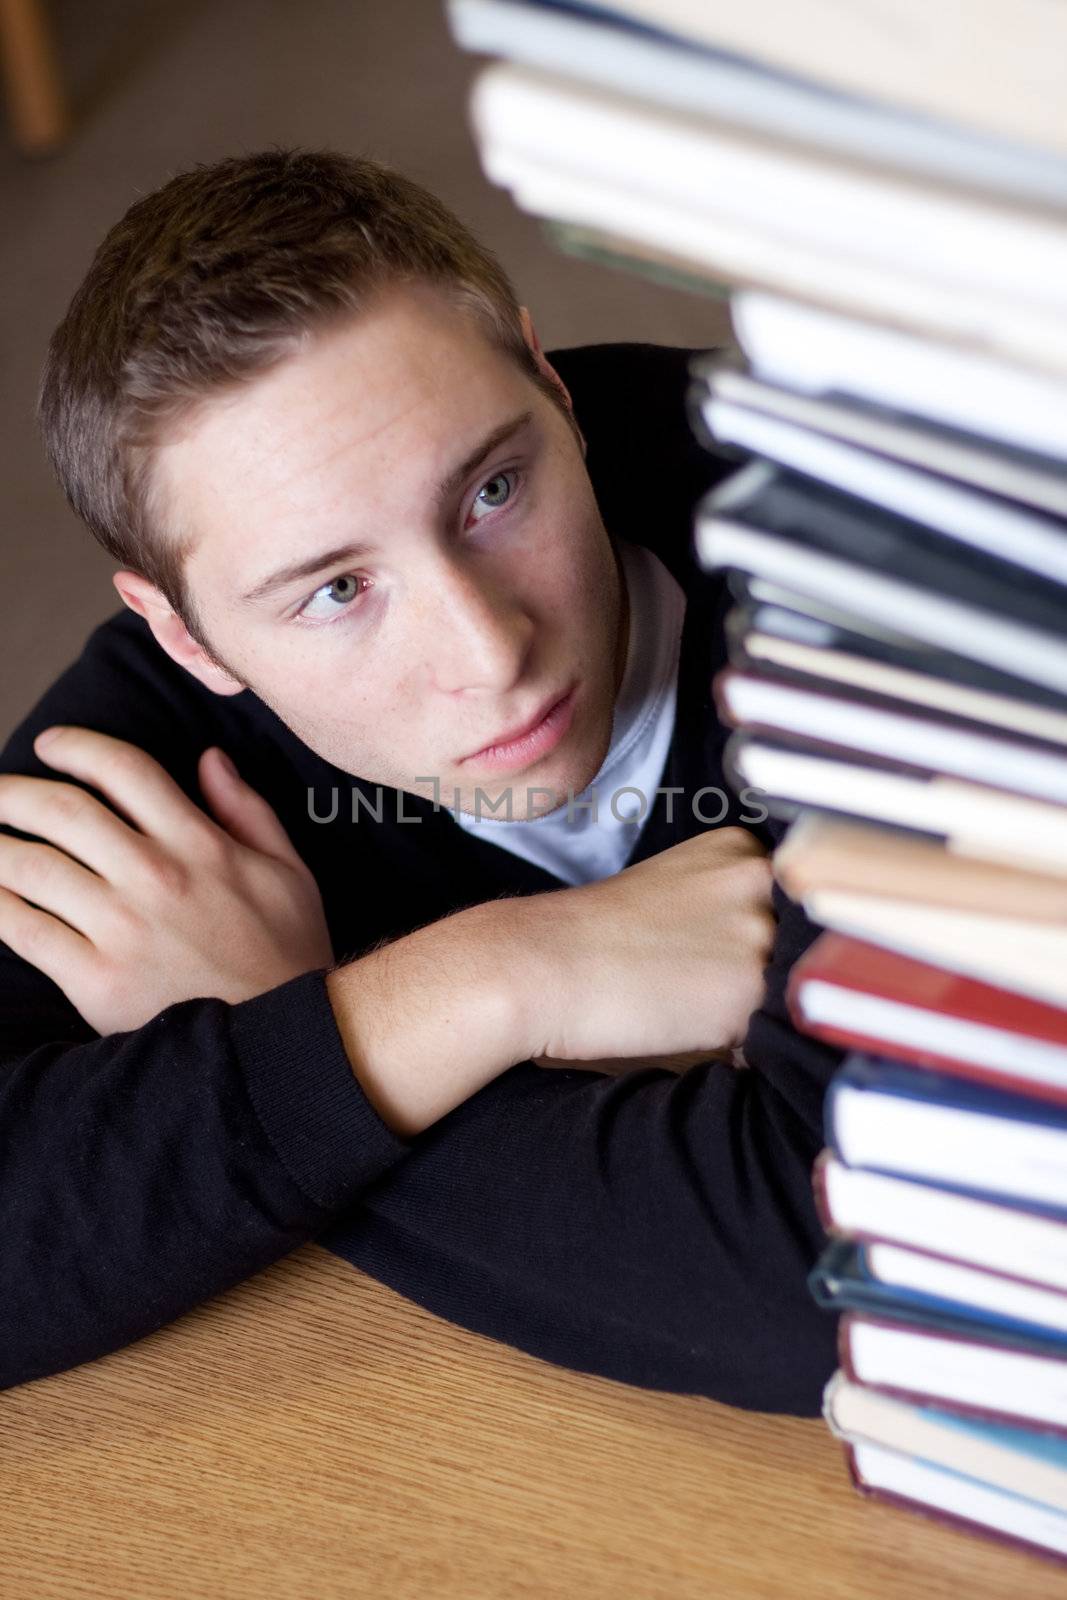 A frustrated and stressed out student looks up at the high pile of textbooks he has to go through to do his homework.